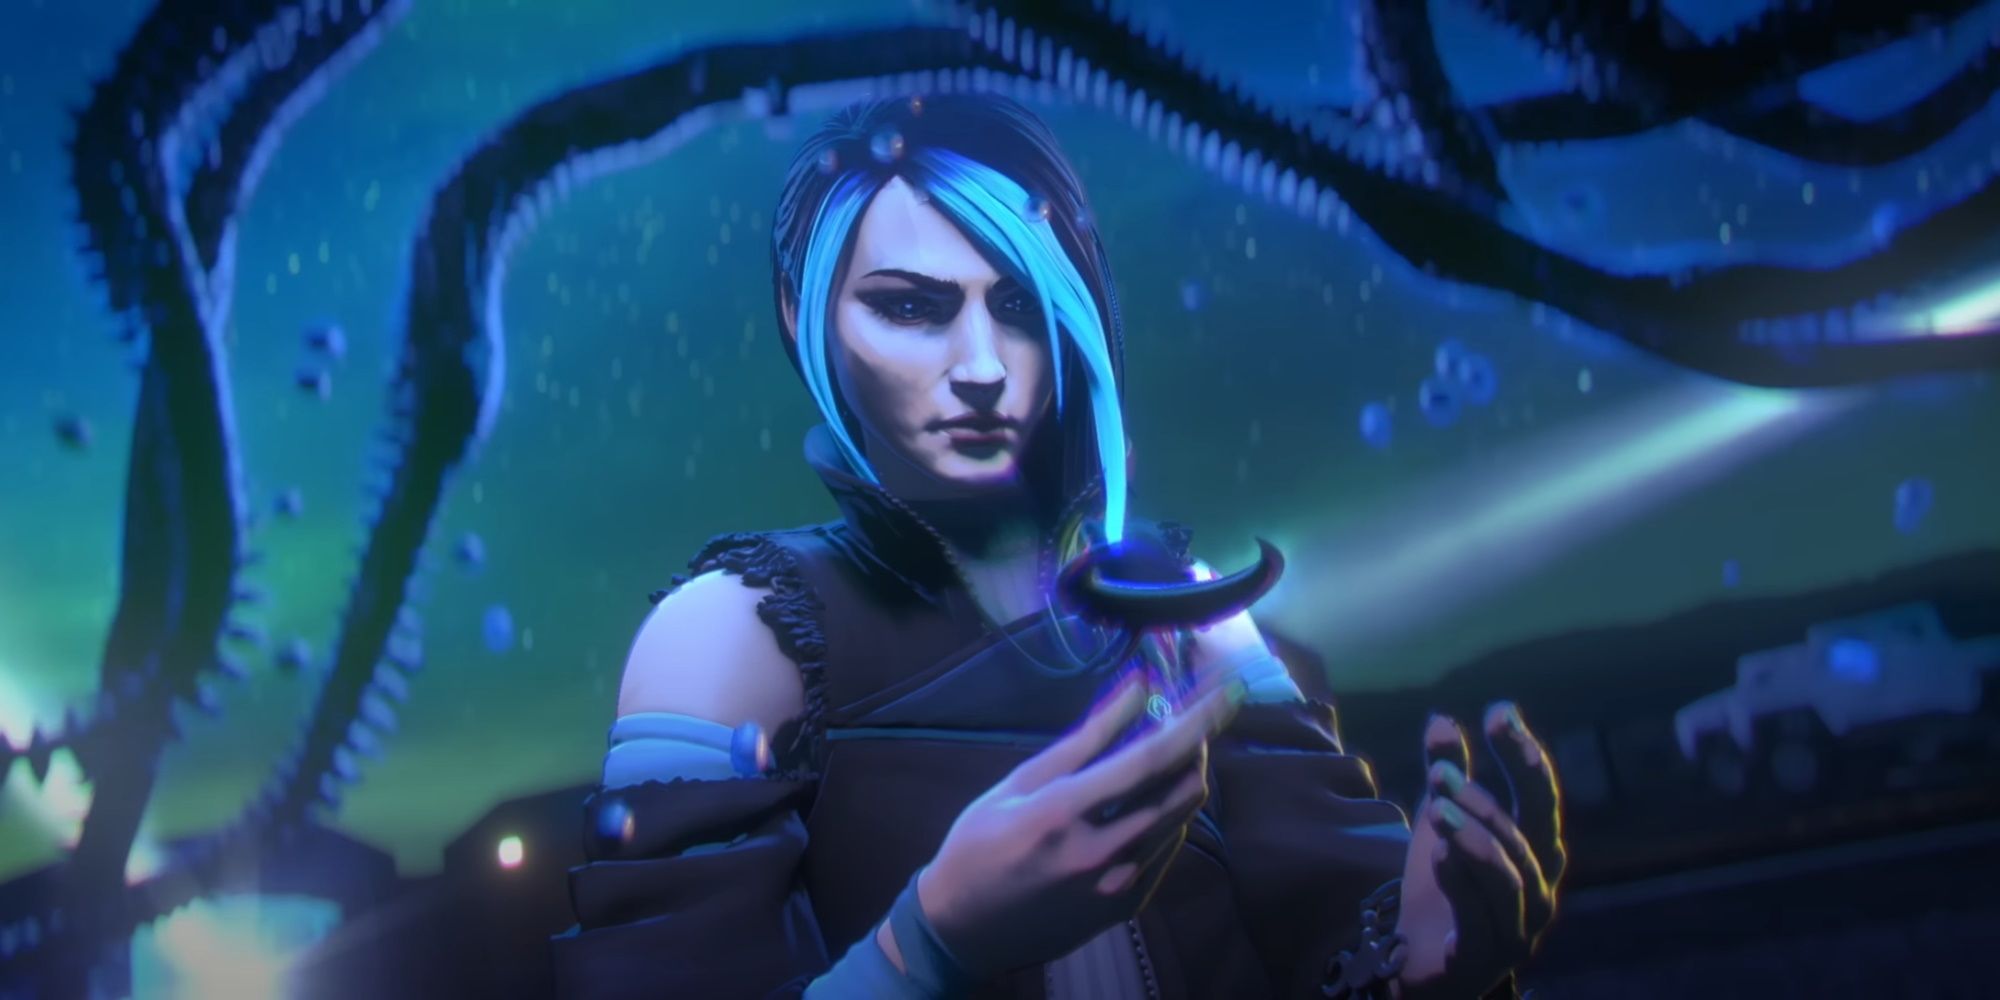 New Apex Legends Character Catalyst Is A Trans Woman